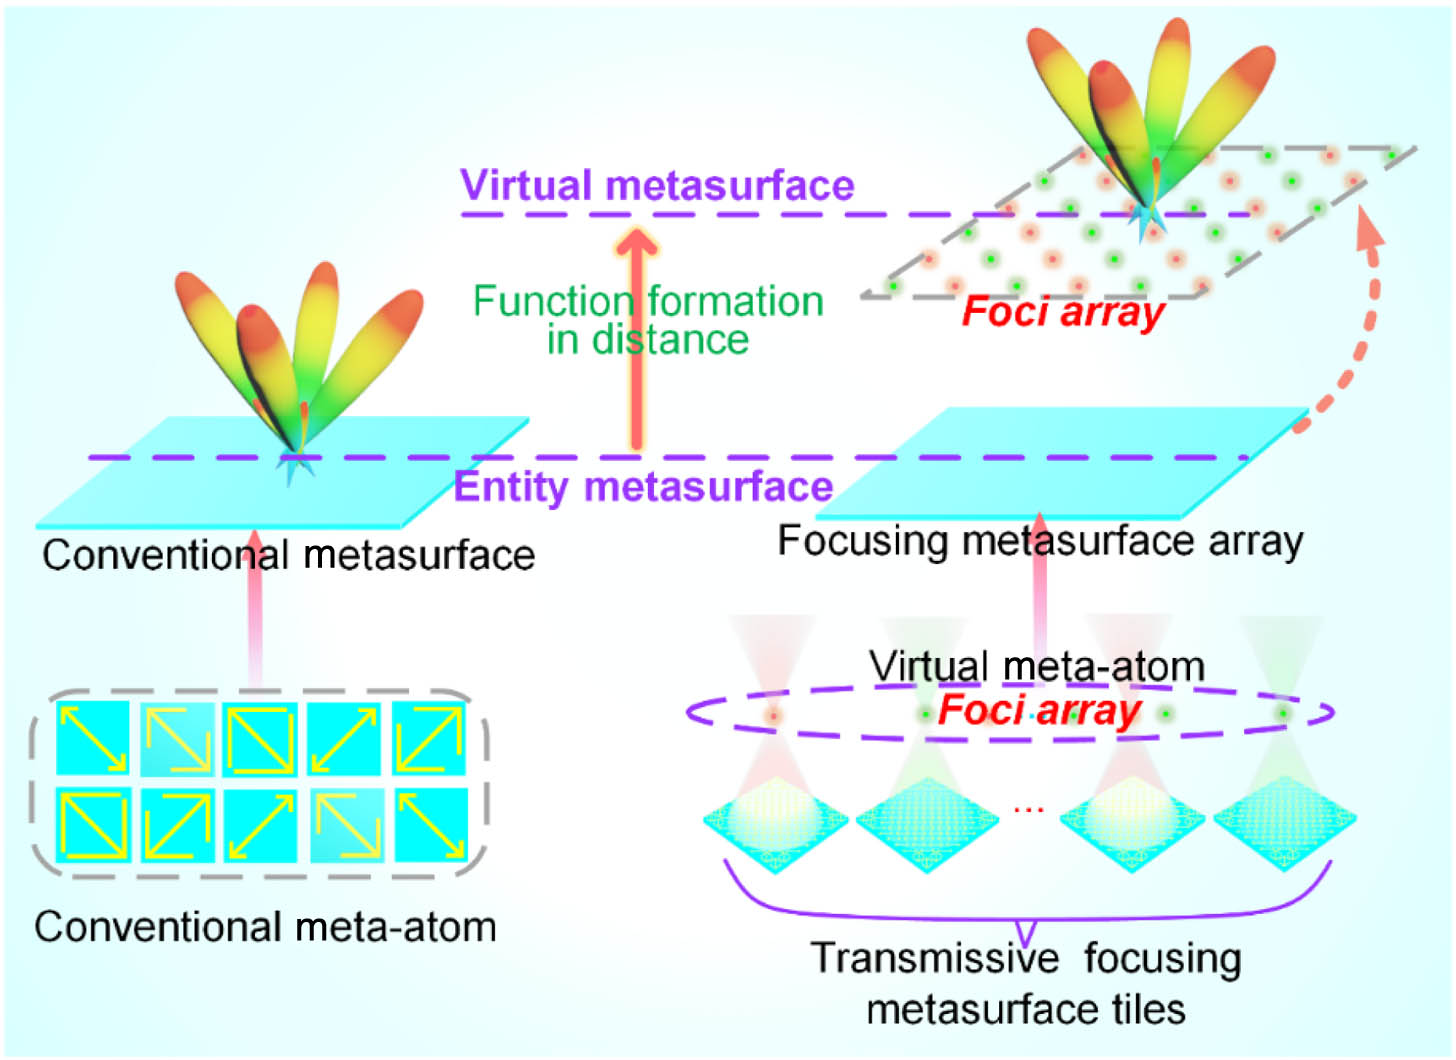 Schematic diagram of the virtual metasurface compared with the conventional one.